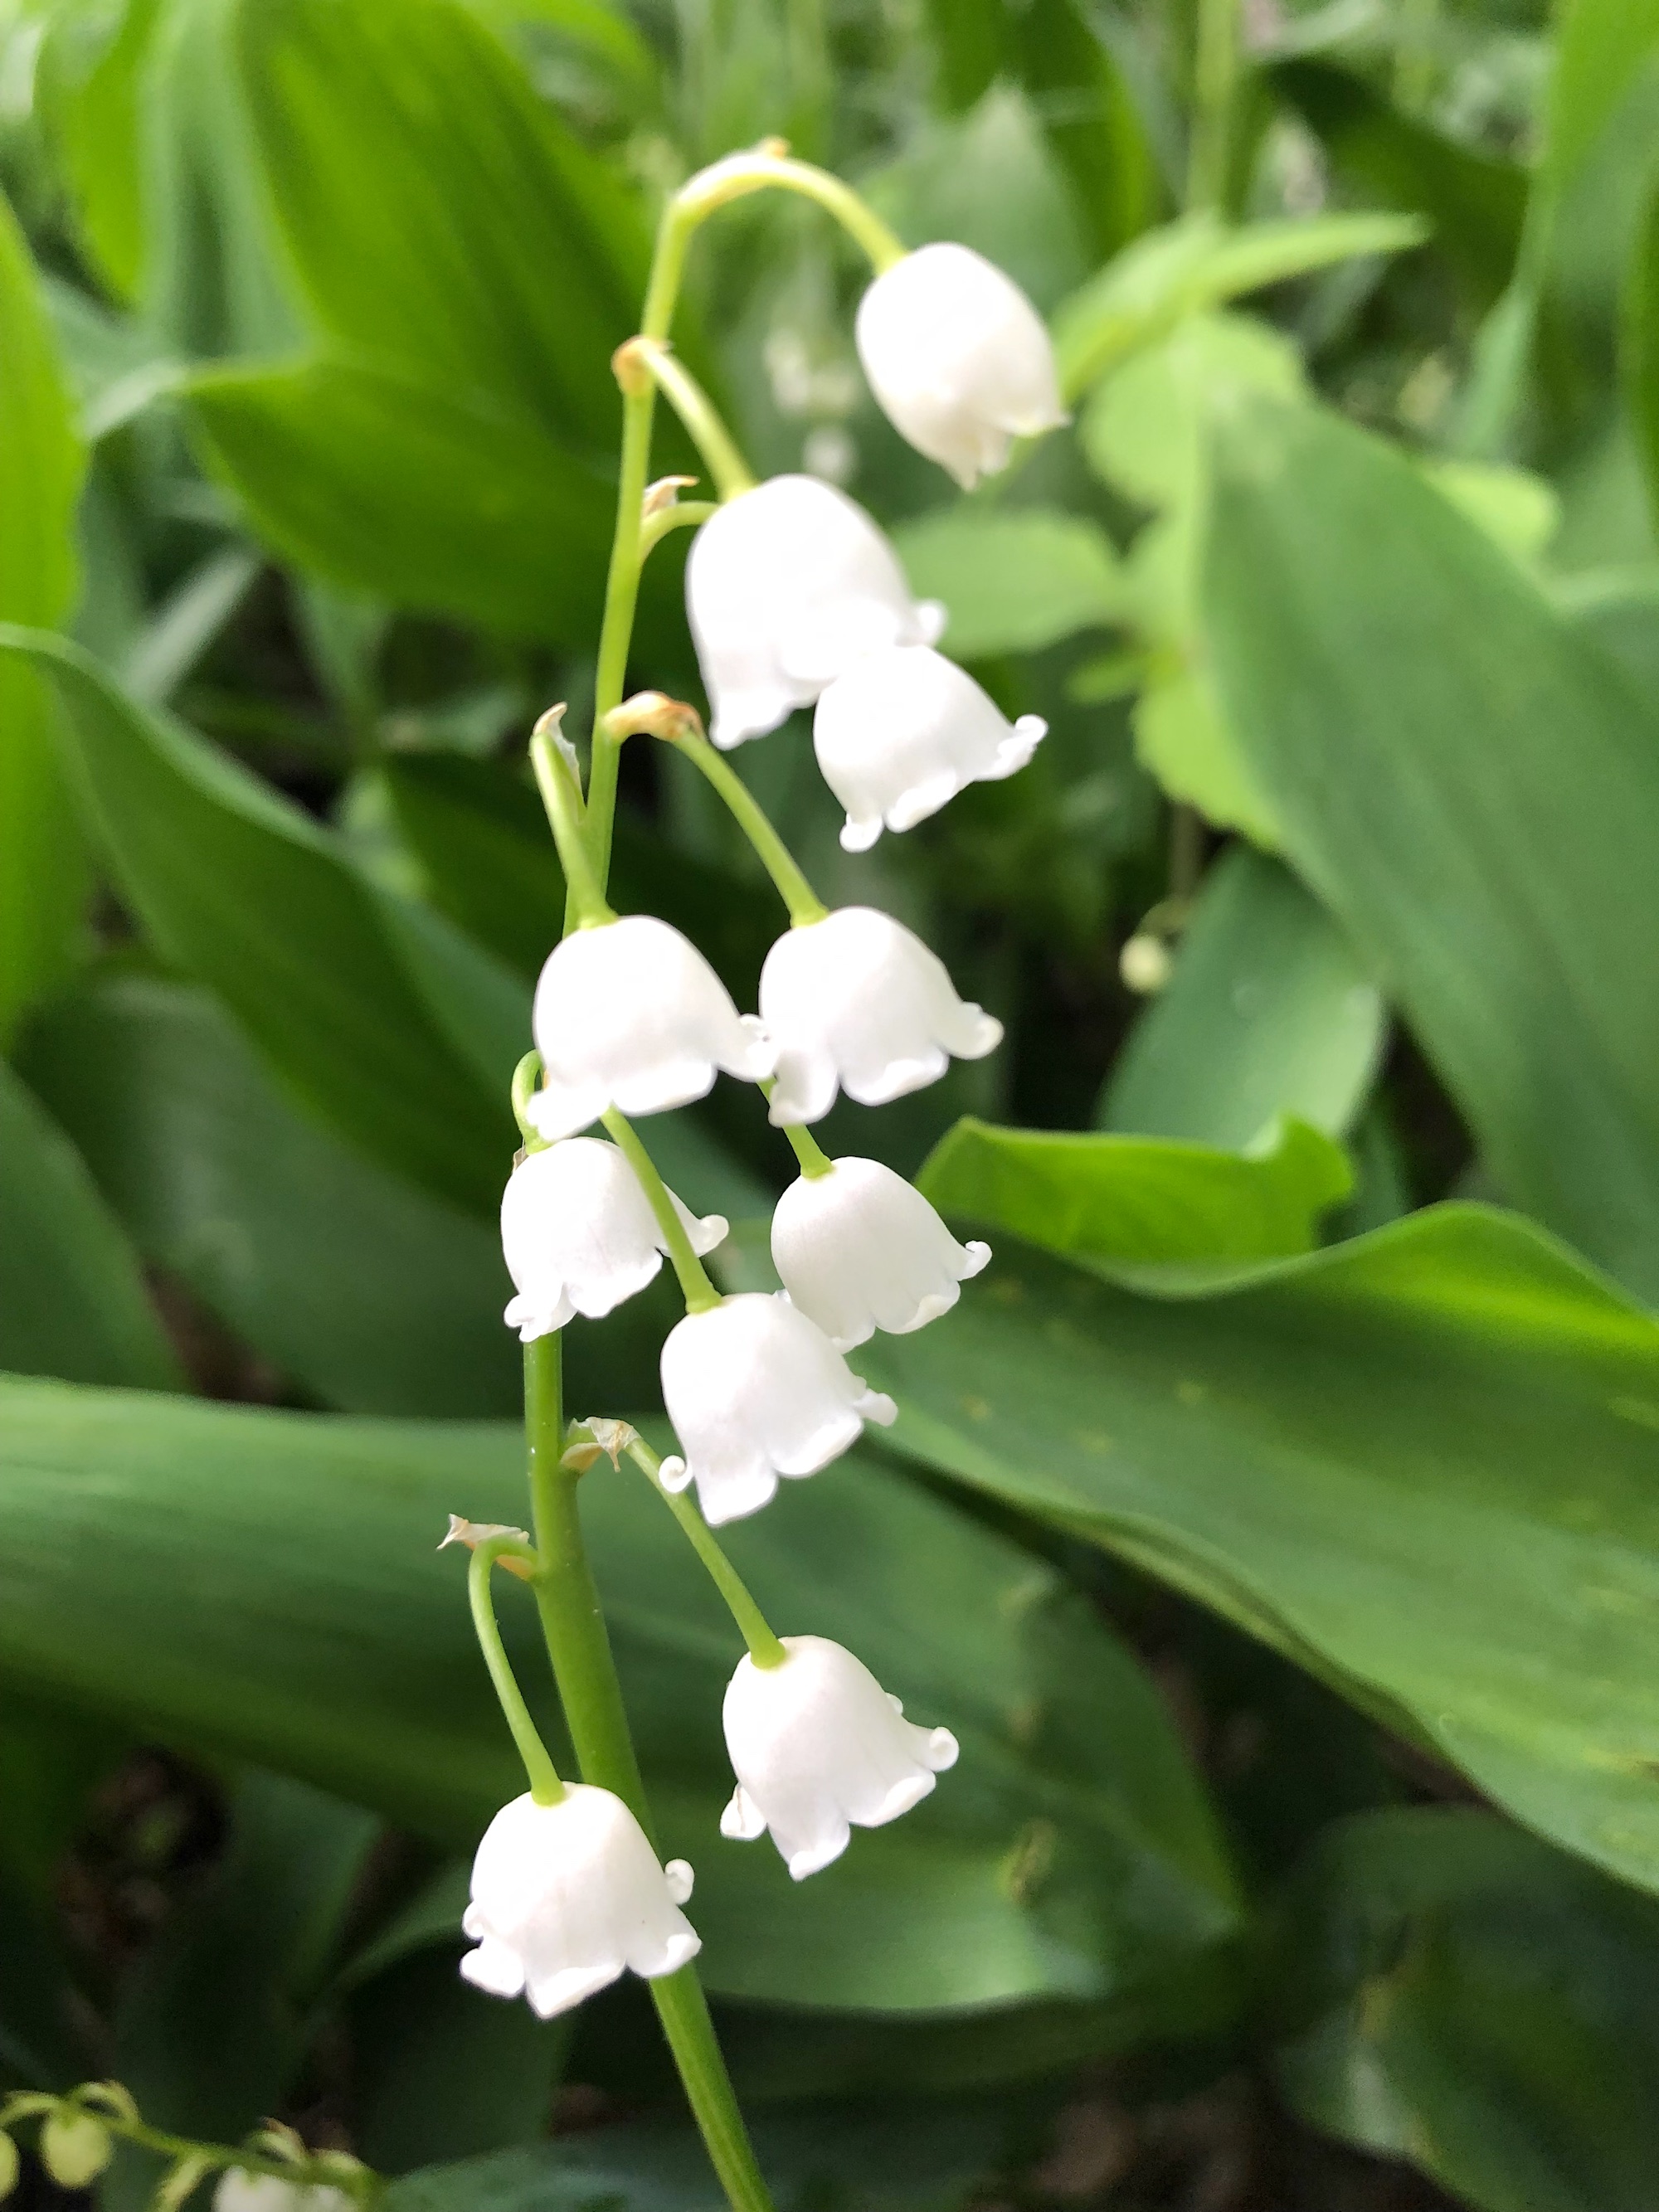 Lily of the Valley in Oak Savanna on May 26, 2019.